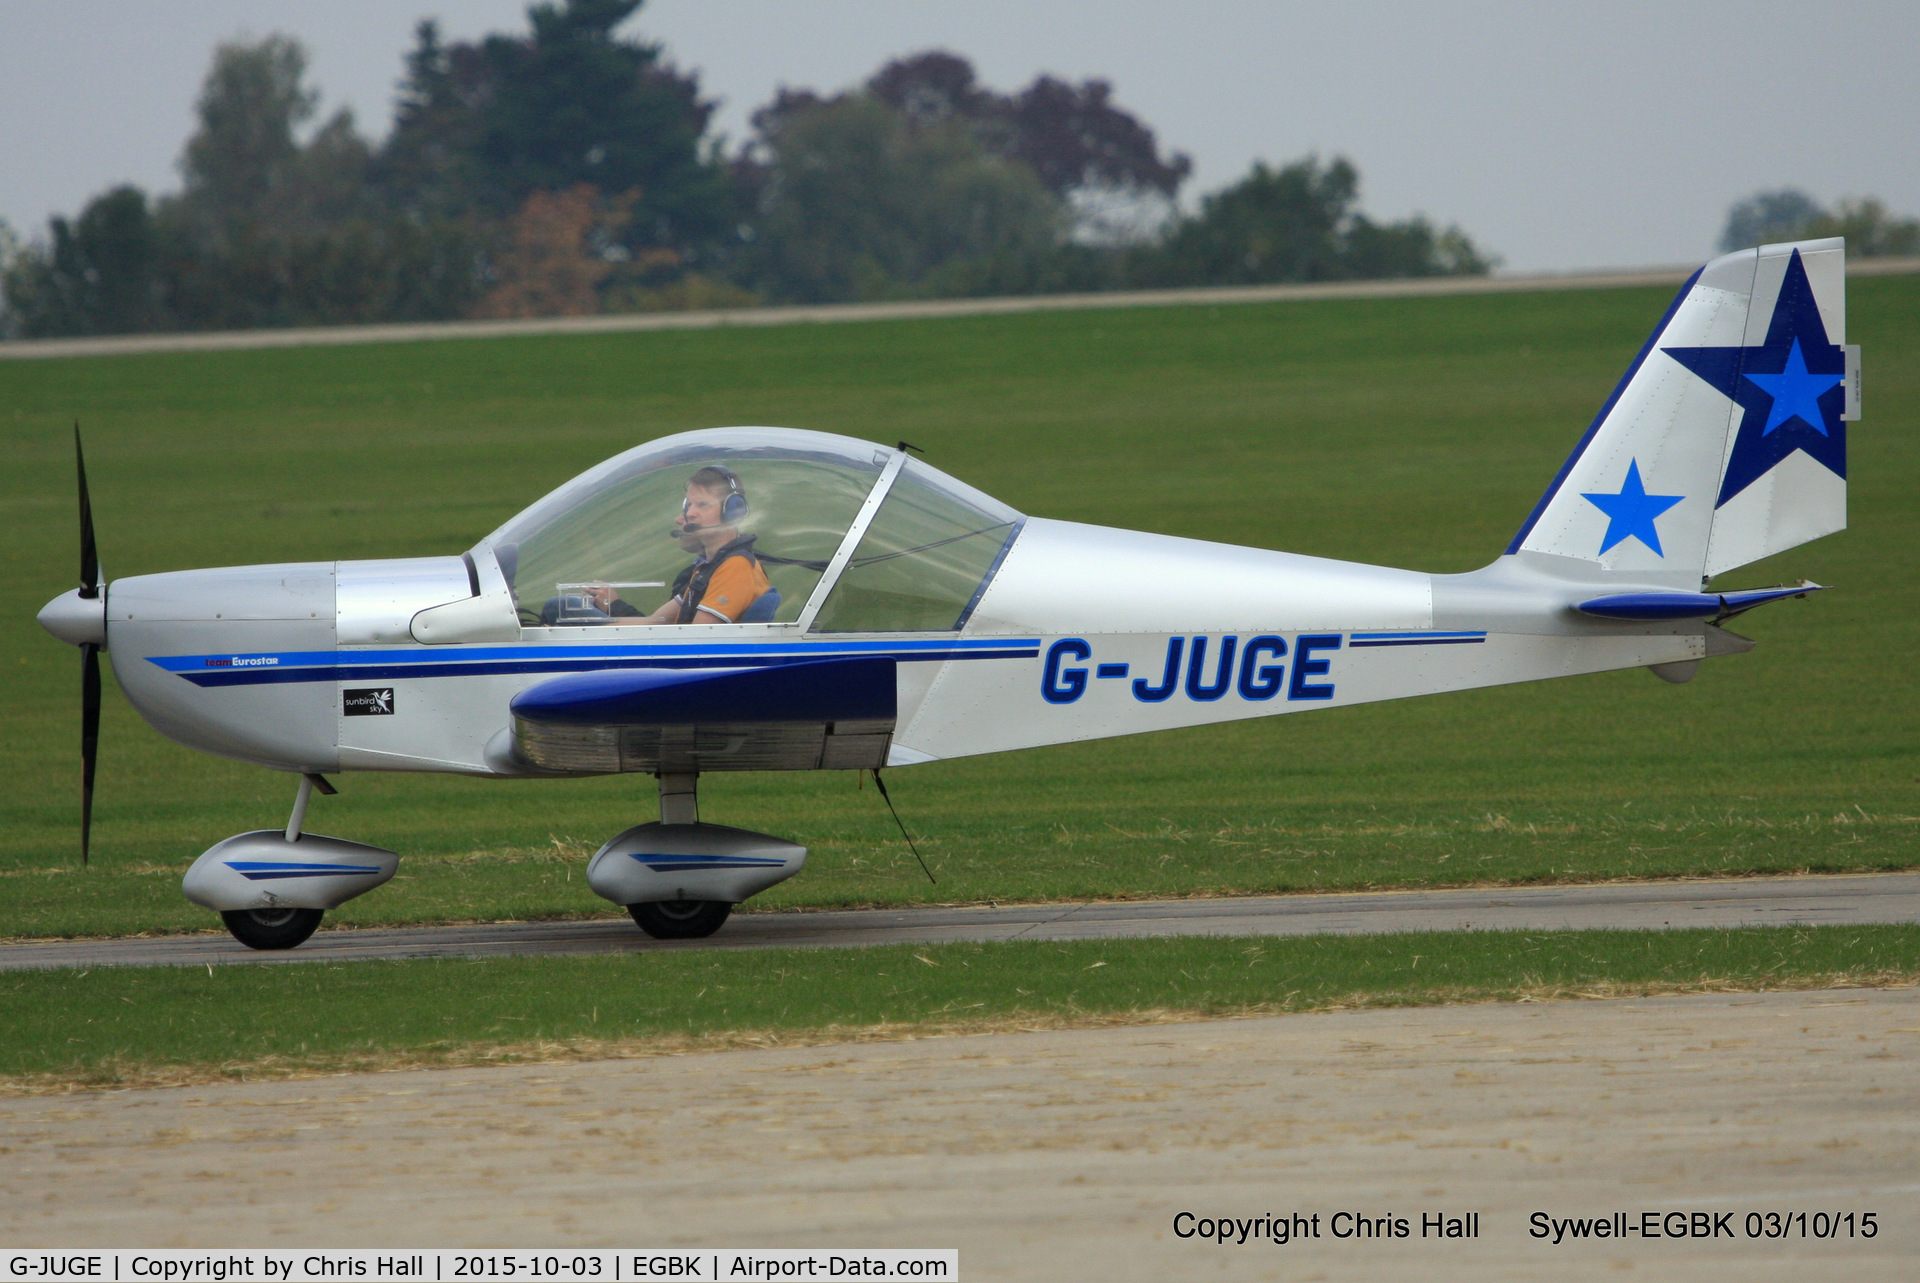 G-JUGE, 2003 Cosmik EV-97 TeamEurostar UK C/N 1709, at The Radial And Training Aircraft Fly-in